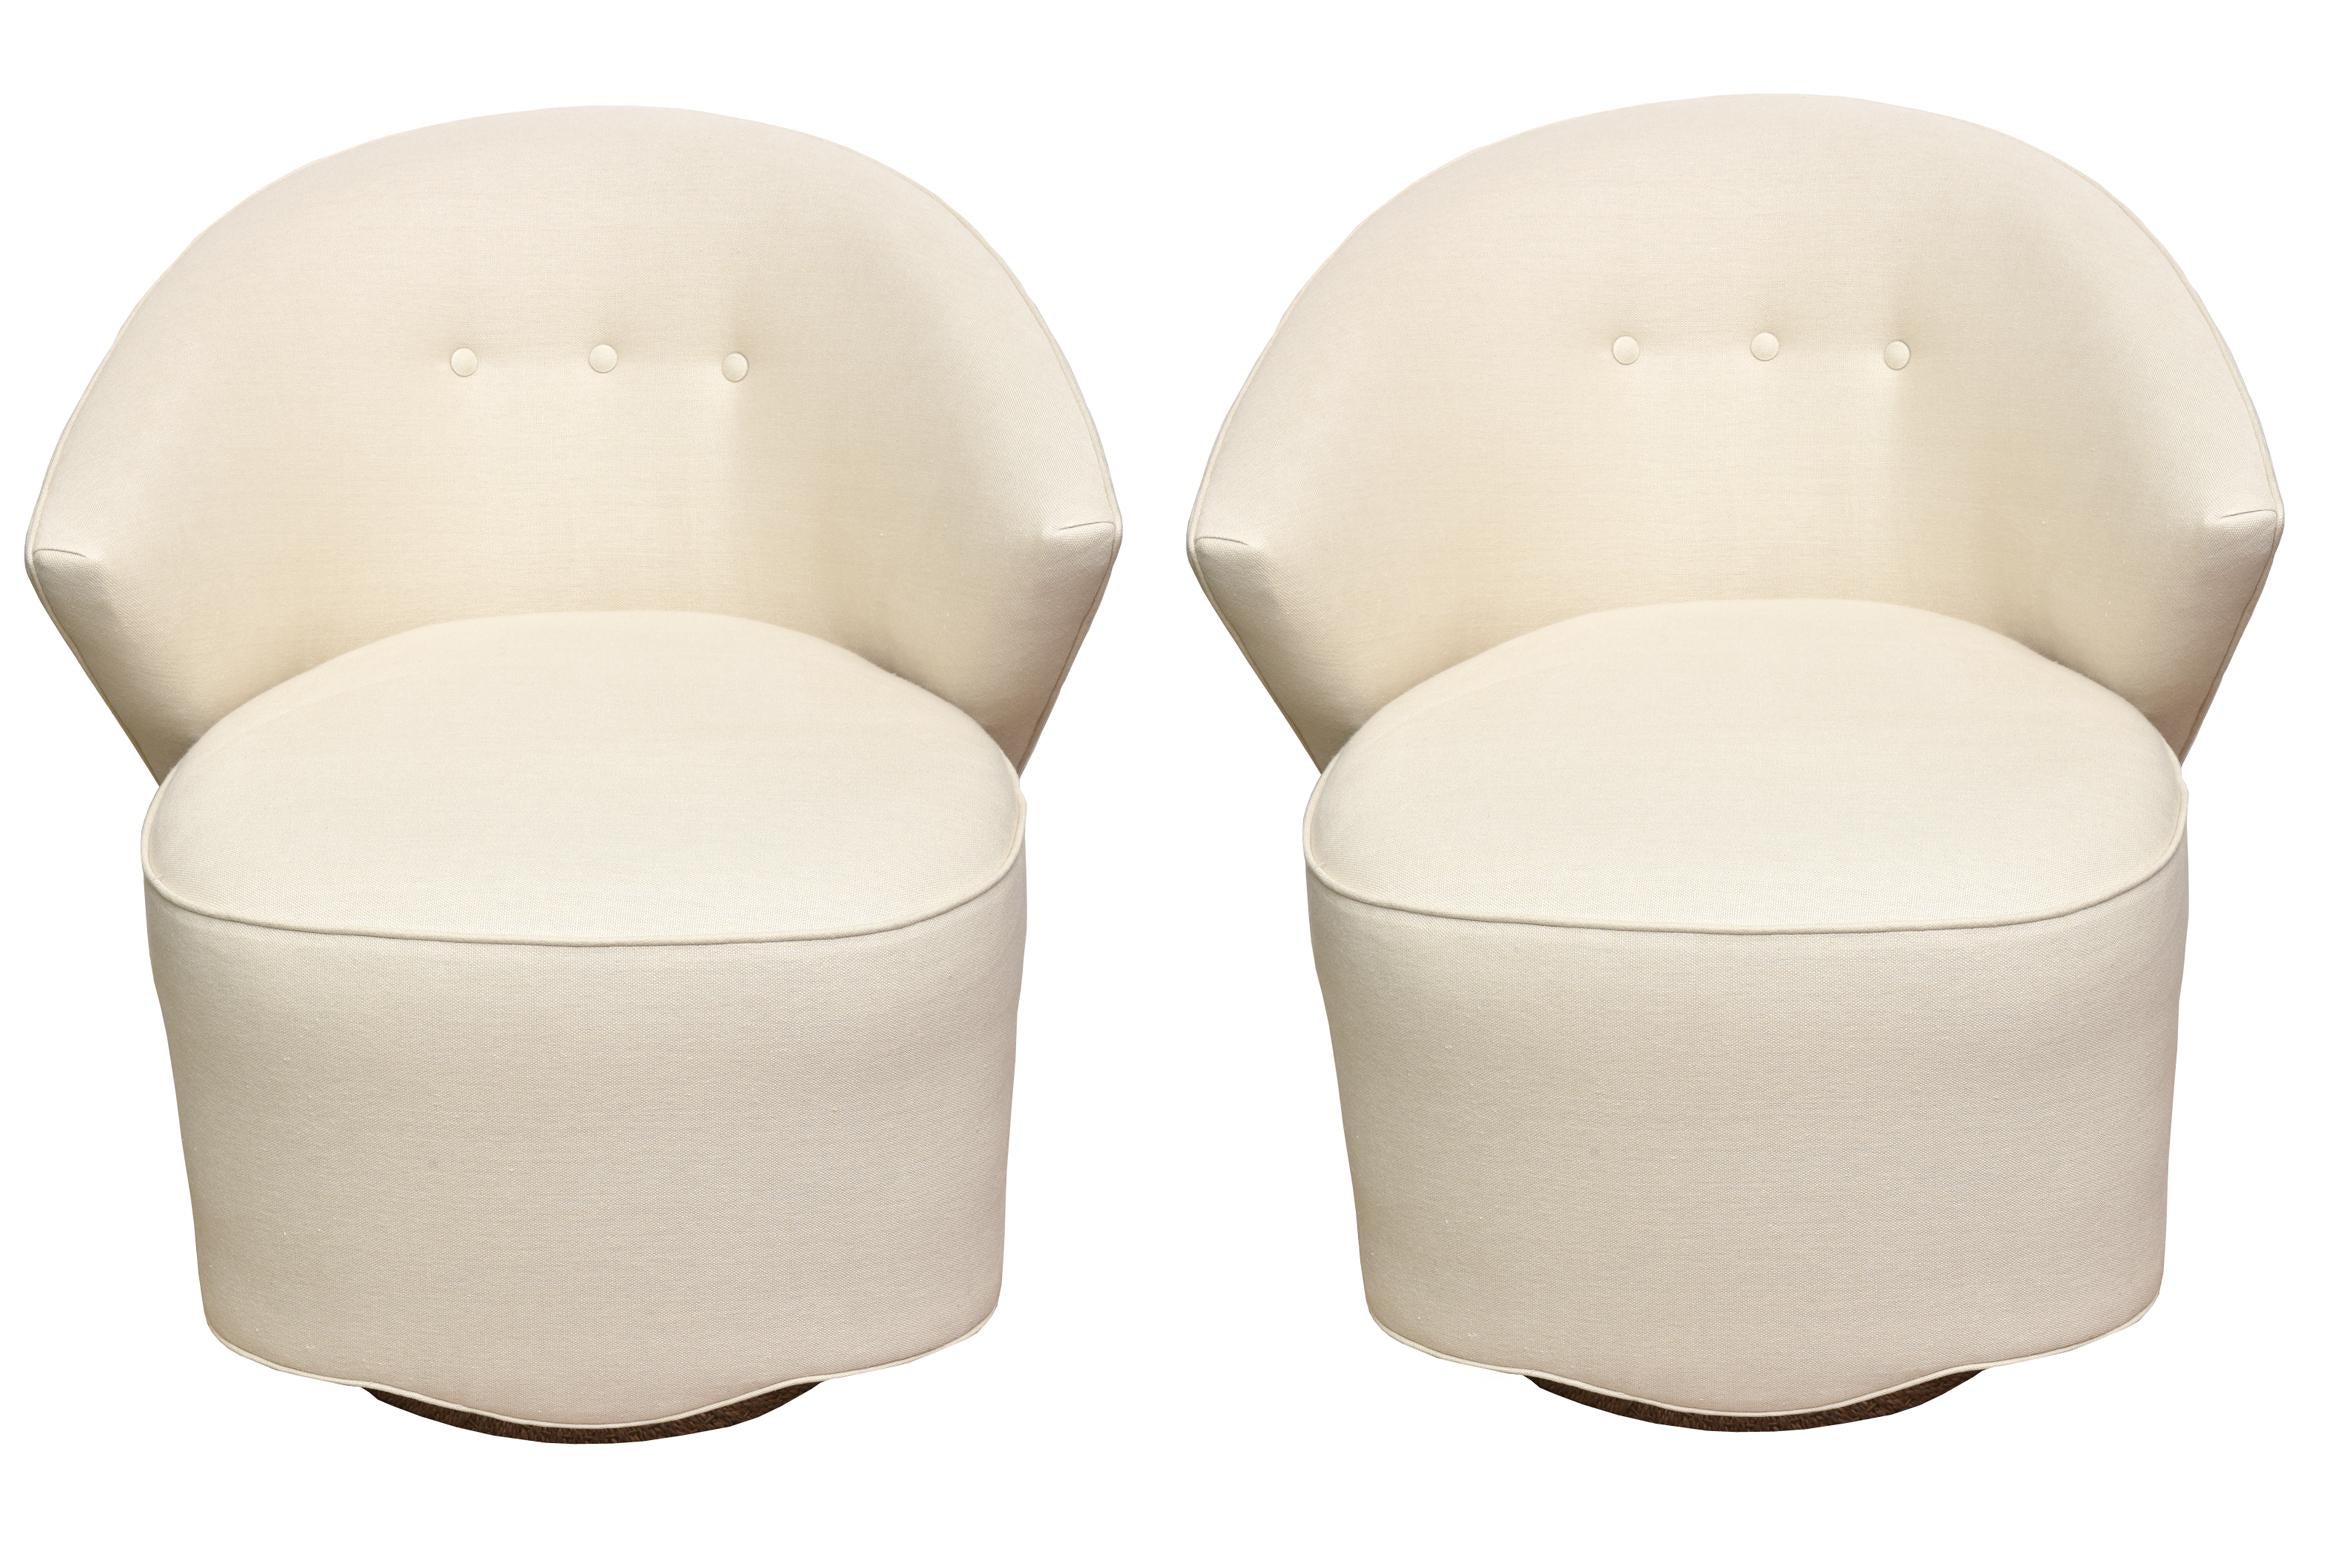 These amazing fully restored pair of Michael Wolk sculptural swivel side or lounge chairs are stunning. These were designs by Michael Work for Directional in 1997. They have been newly re-upholstered in an off-white to tan linen and cotton